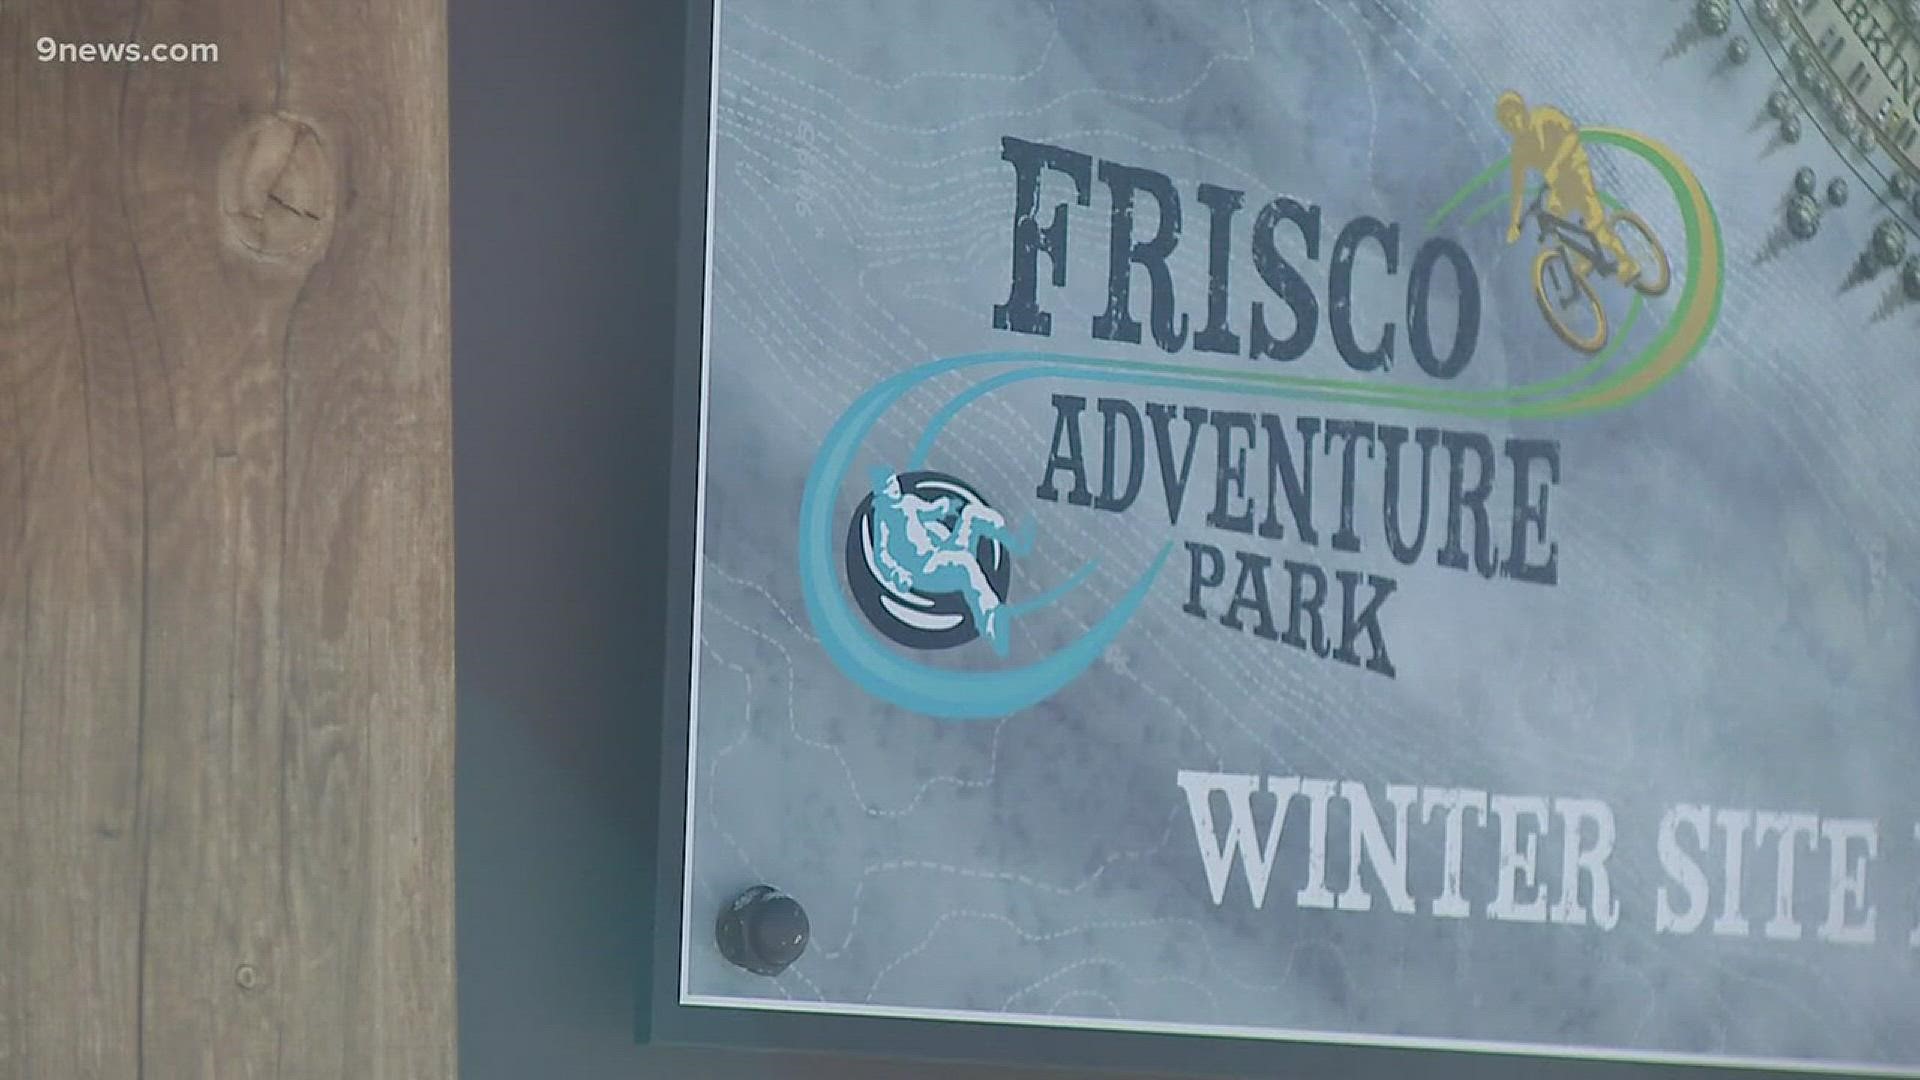 It's not open yet, but spots are booking up for tubing in Frisco so you'll want to plan ahead.